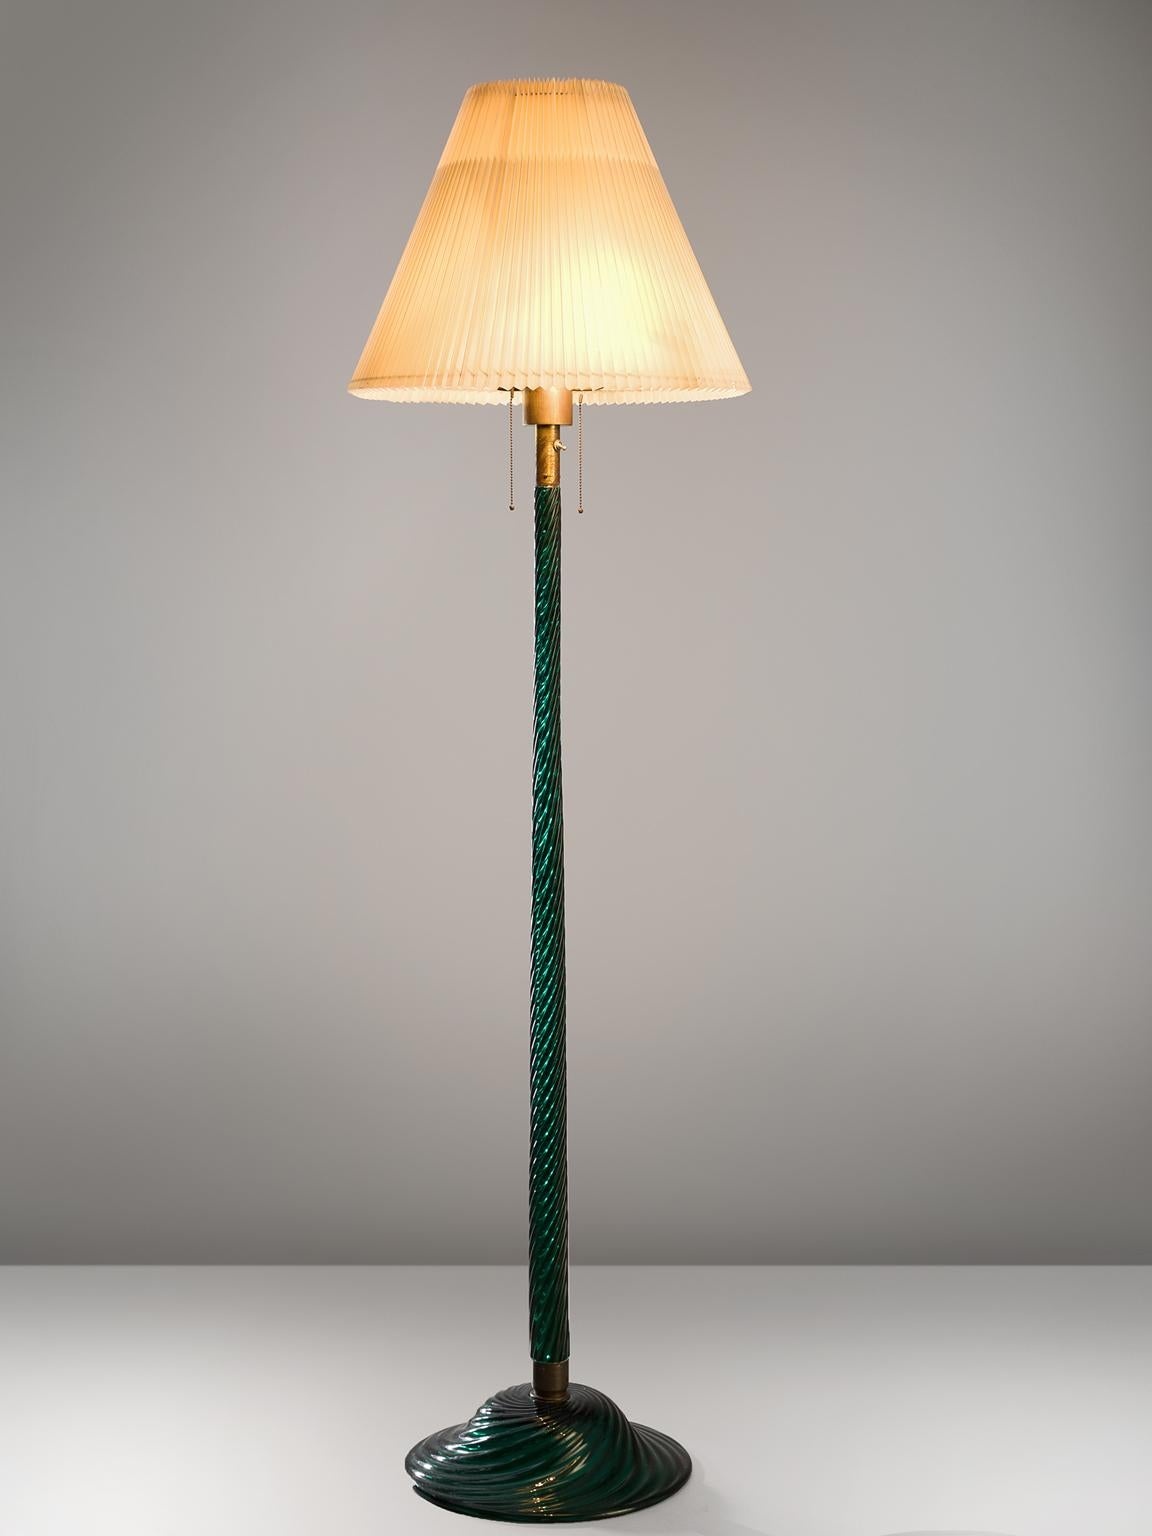 Venini floor lamp, glass, Italy, design 1934, production later.

This Classic floor lamp is executed in a wonderful clear color. The lamp has a ribbed, 'costelature' stem and base. Thanks to this artful skill this floor lamp is much more than a